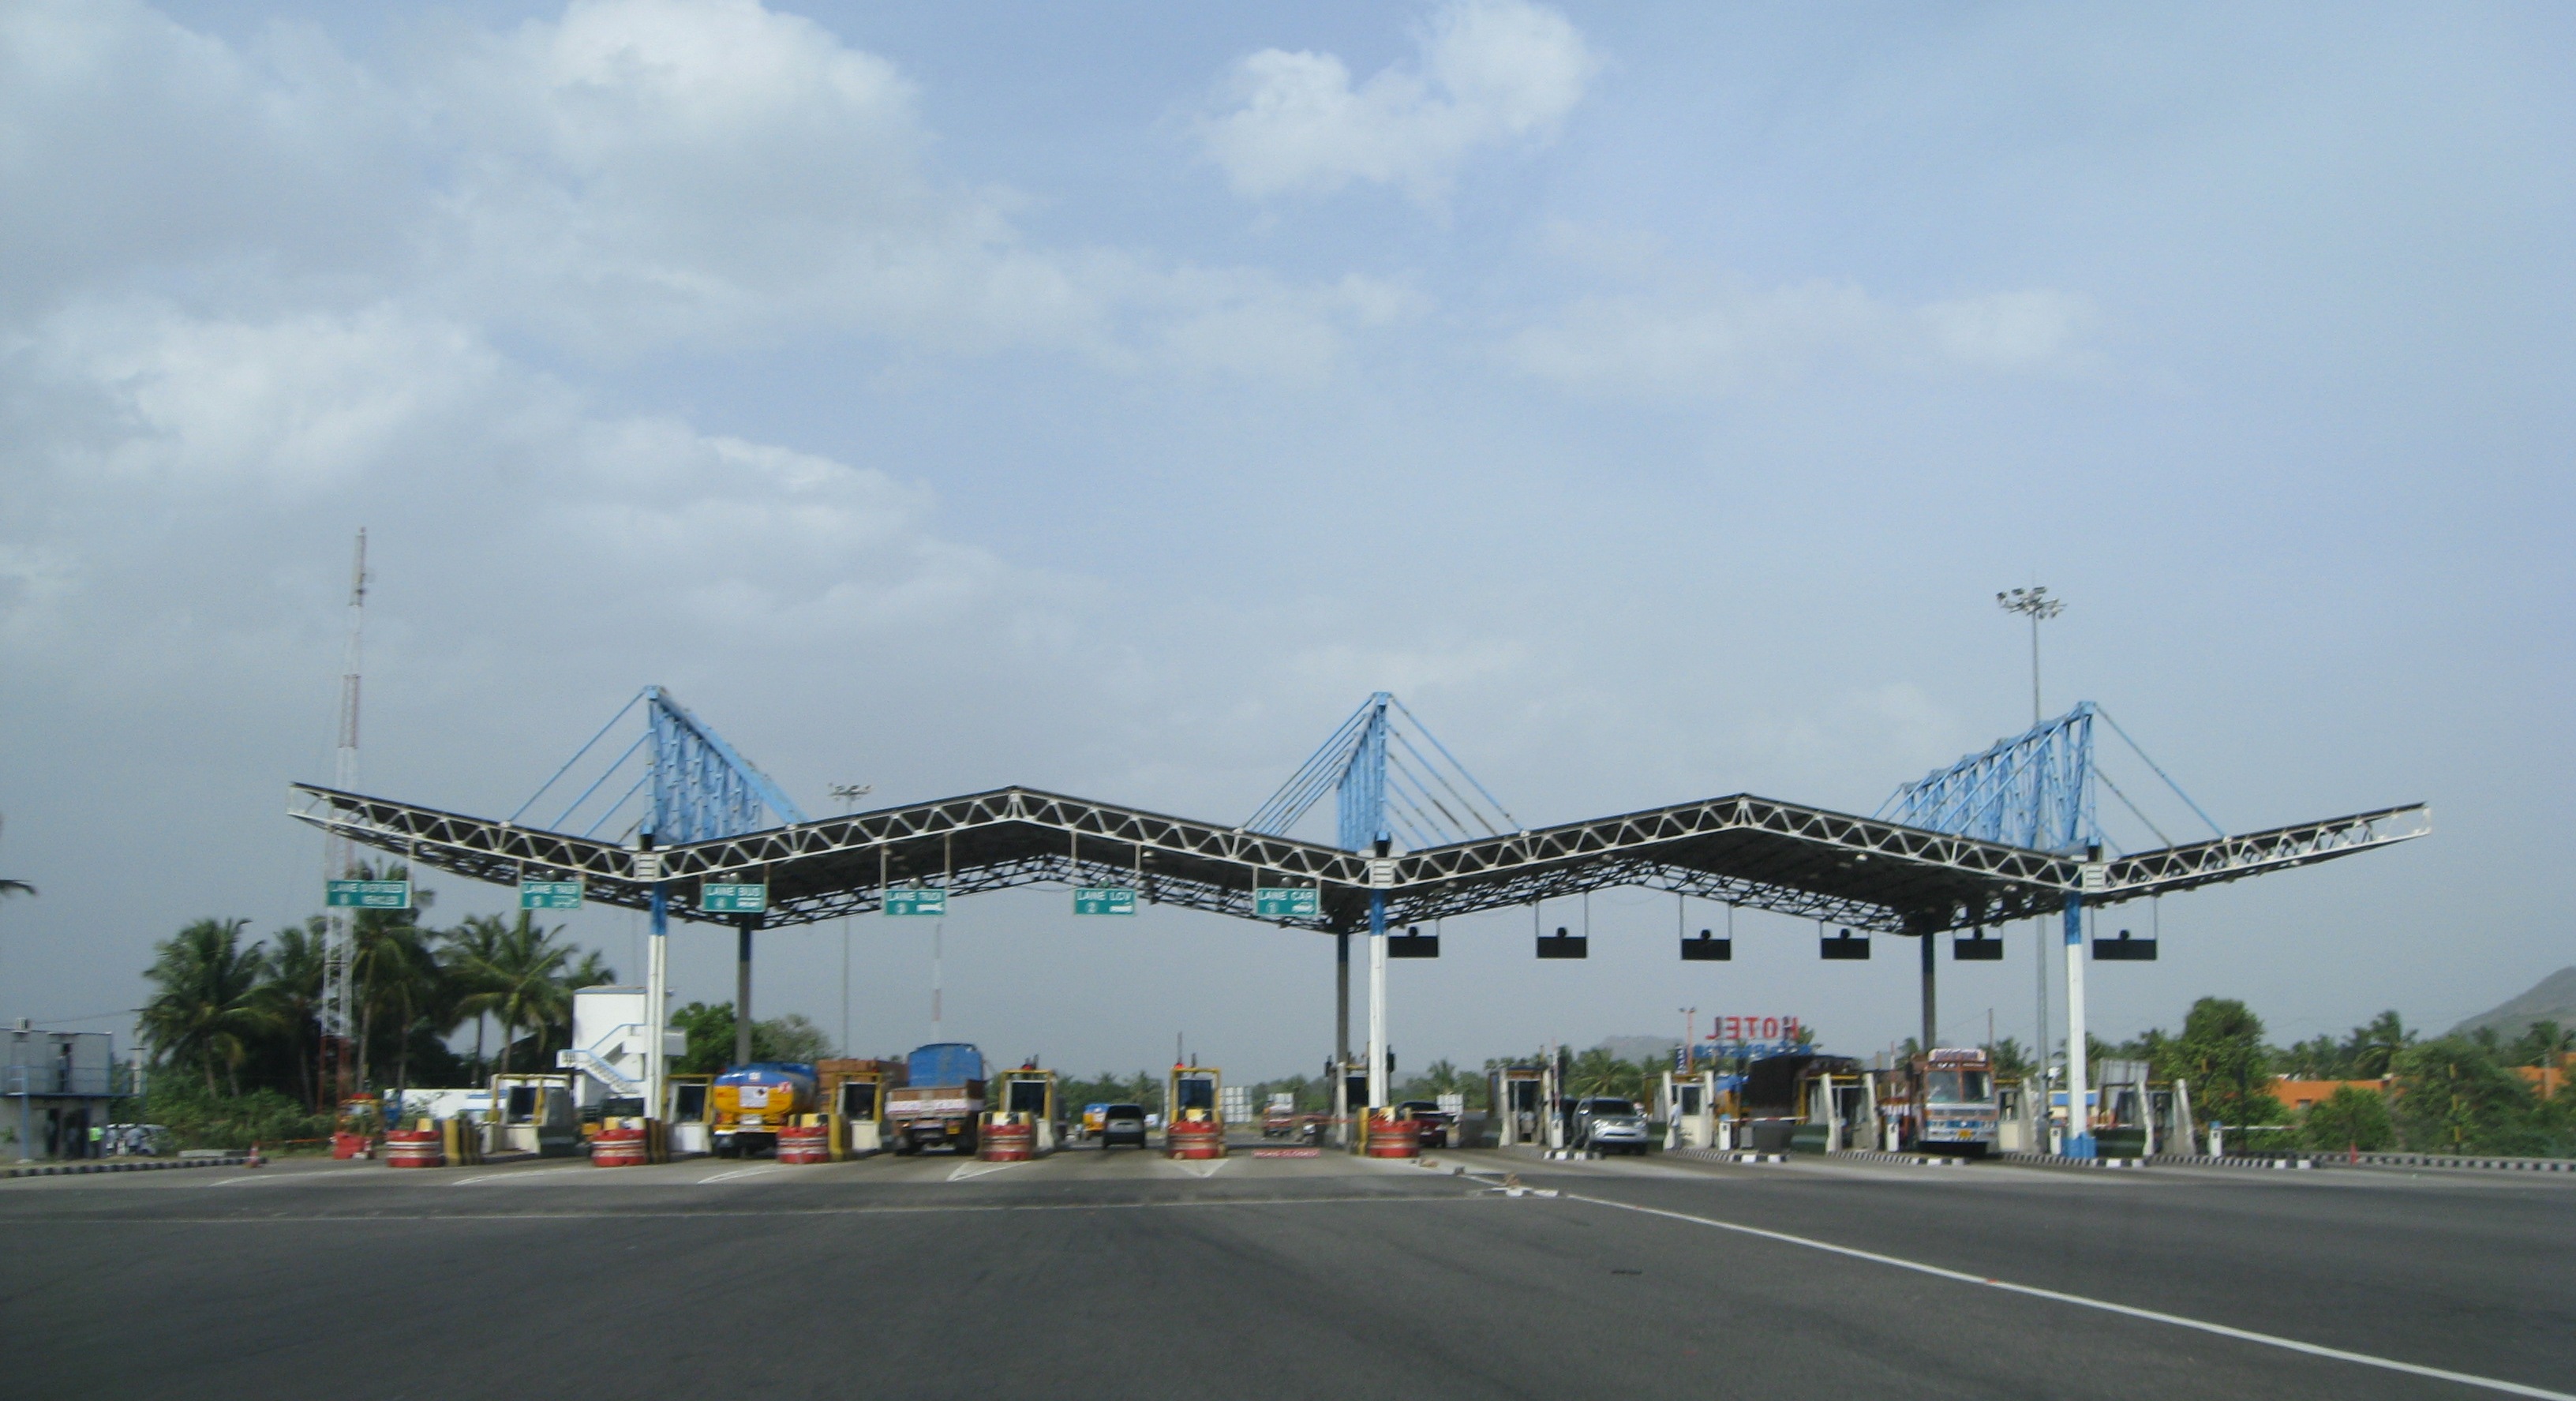 All 360 toll plazas in India to have e-tolling system by April